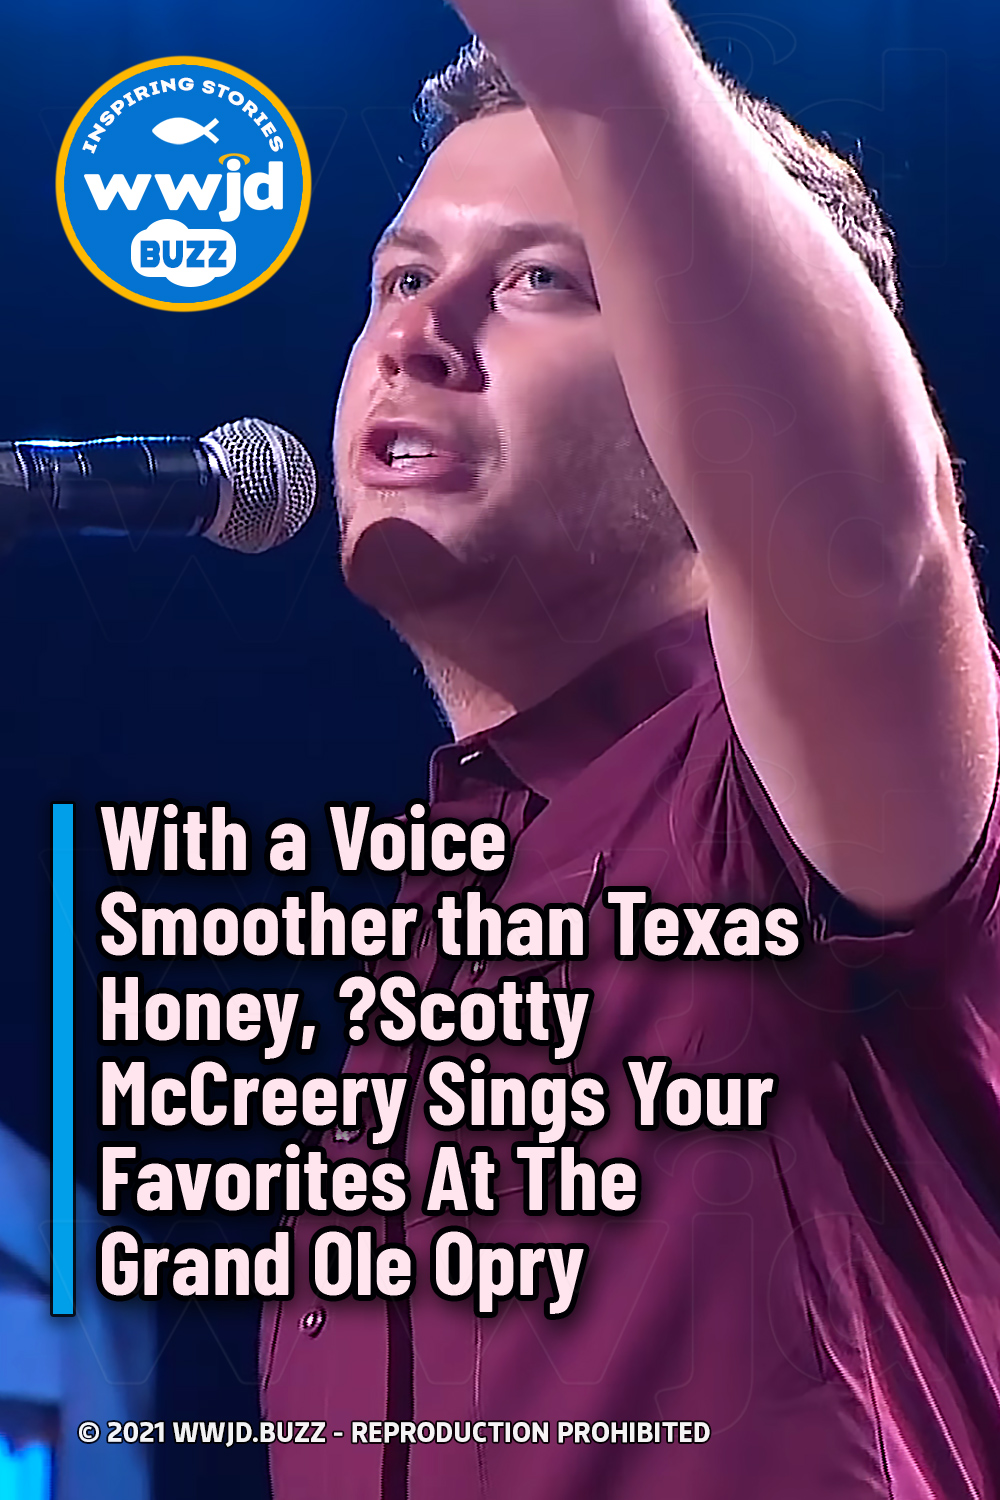 With a Voice Smoother than Texas Honey,  Scotty McCreery Sings Your Favorites At The Grand Ole Opry